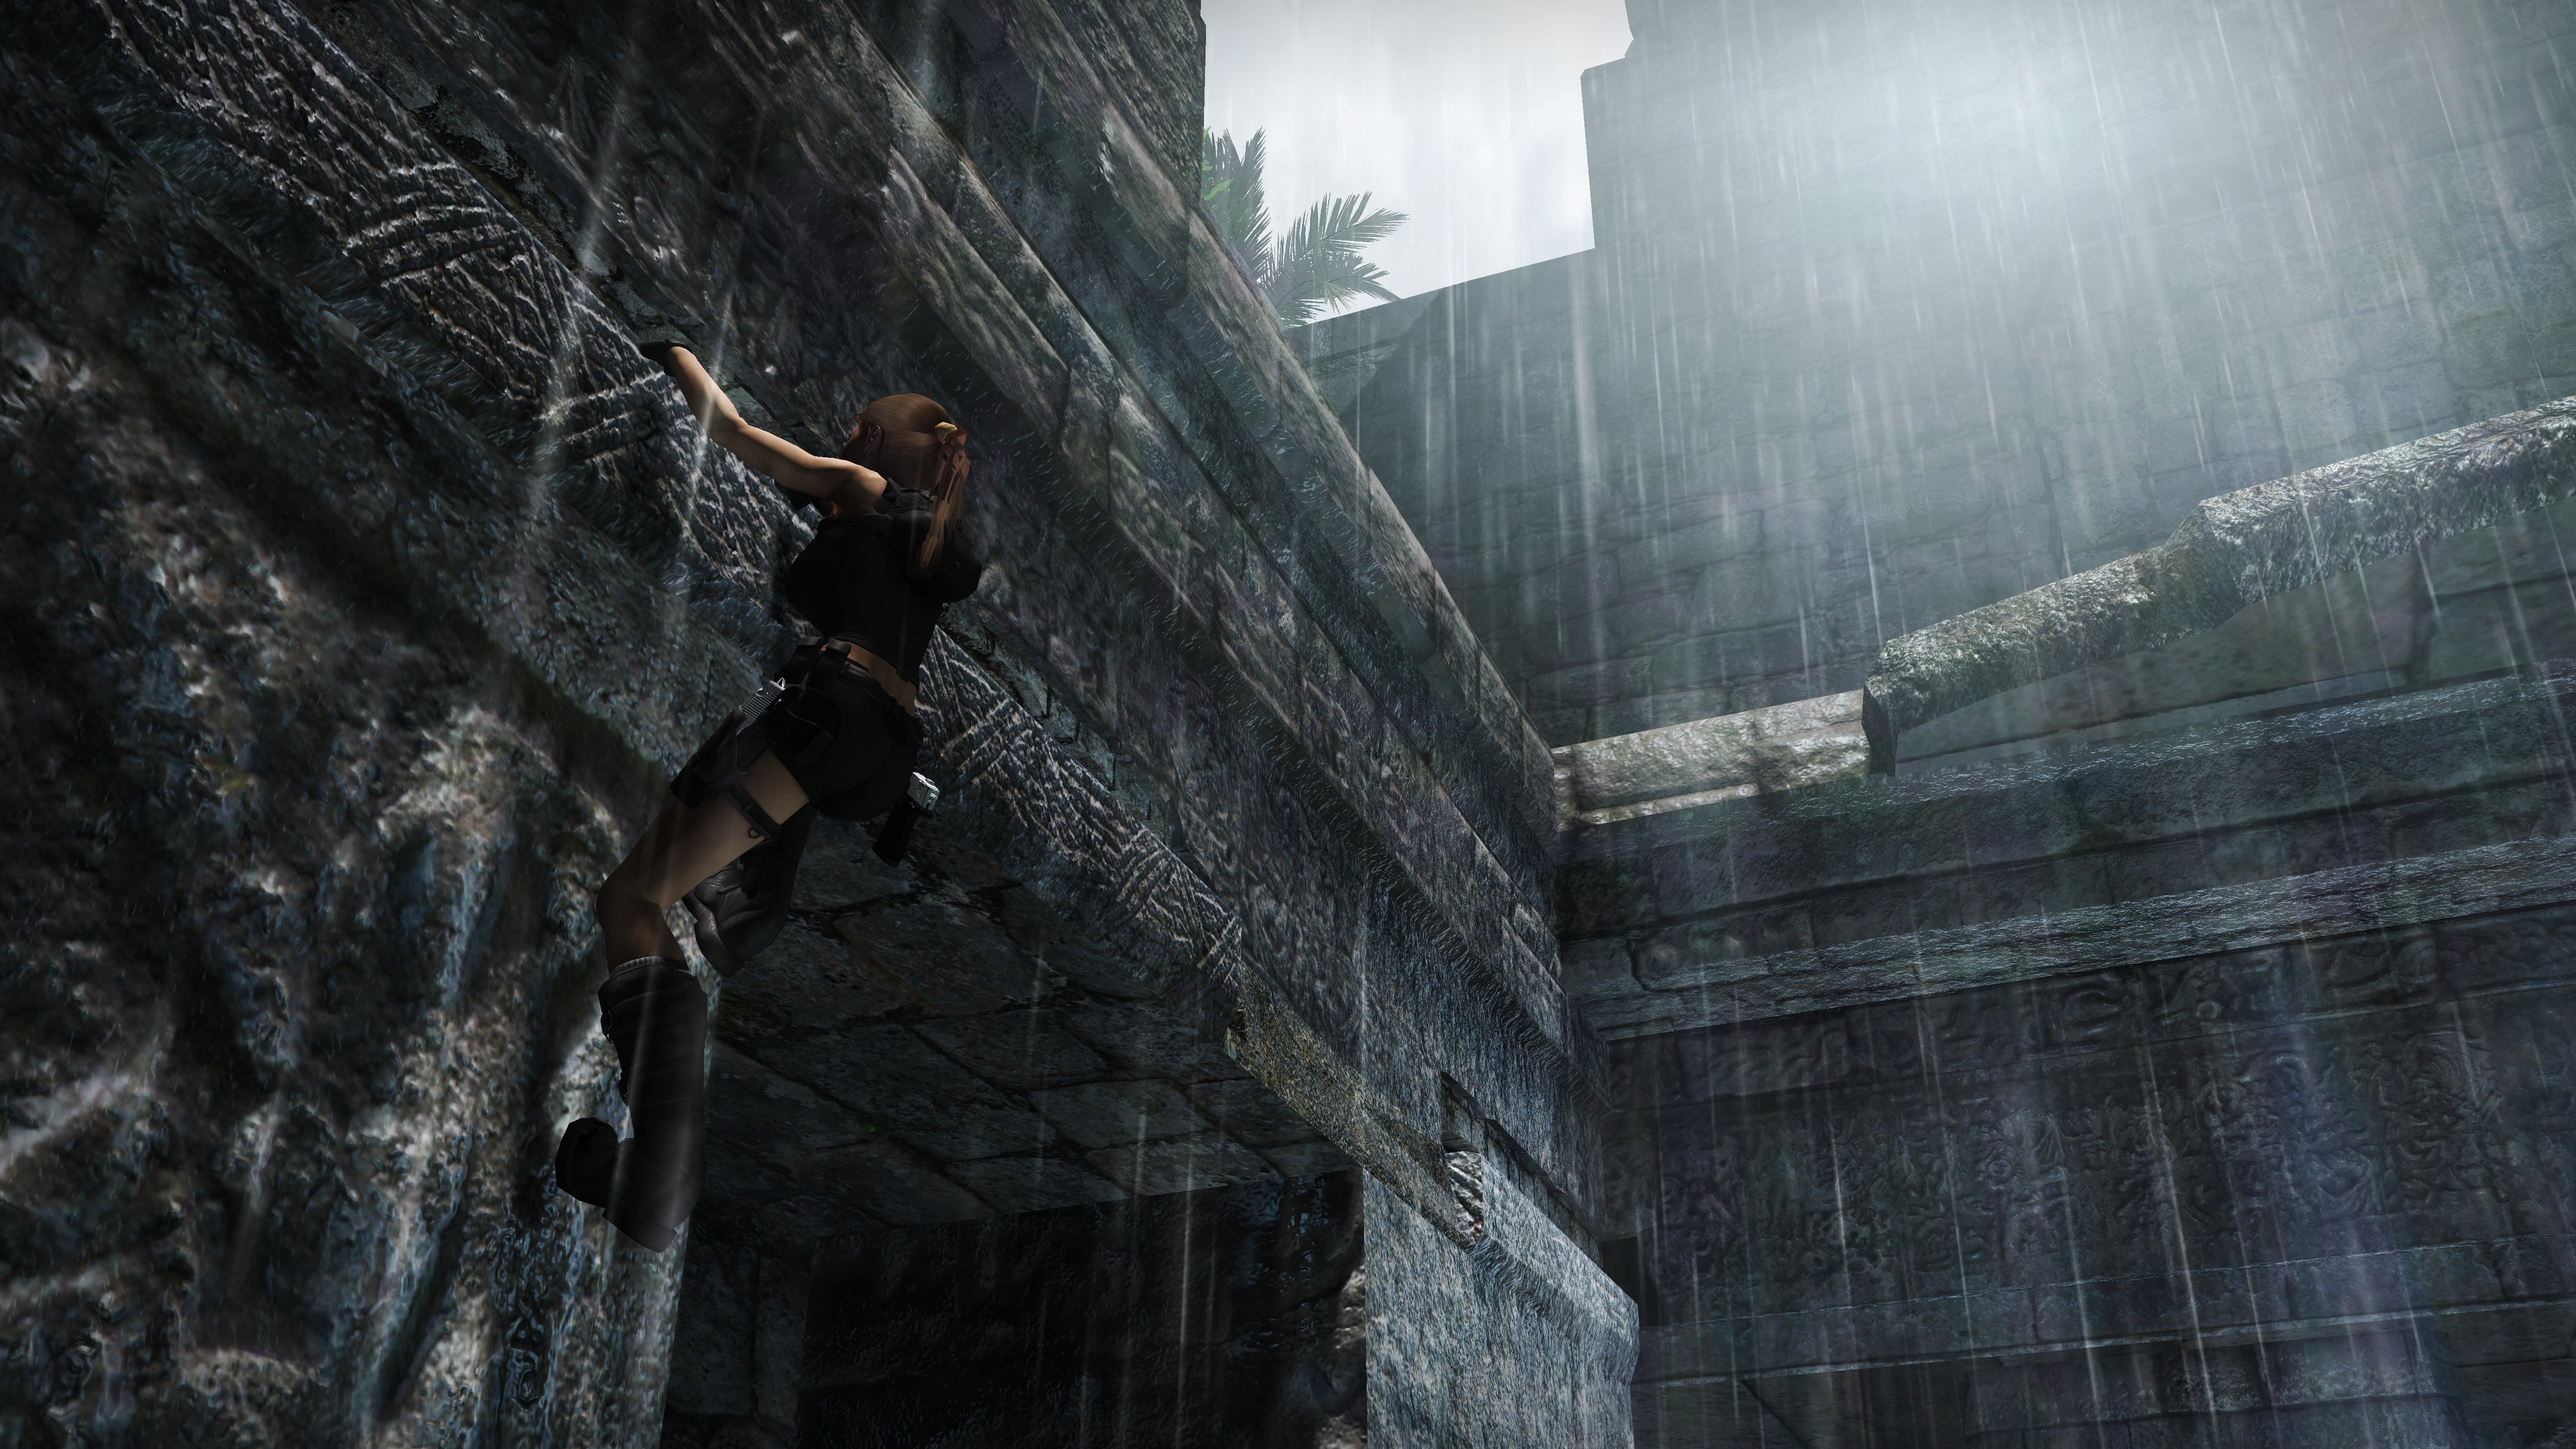 Media asset in full size related to 3dfxzone.it news item entitled as follows: Tomb Raider Underworld, Eidos pubblica 11 nuovi screenshots | Image Name: news6742_9.jpg